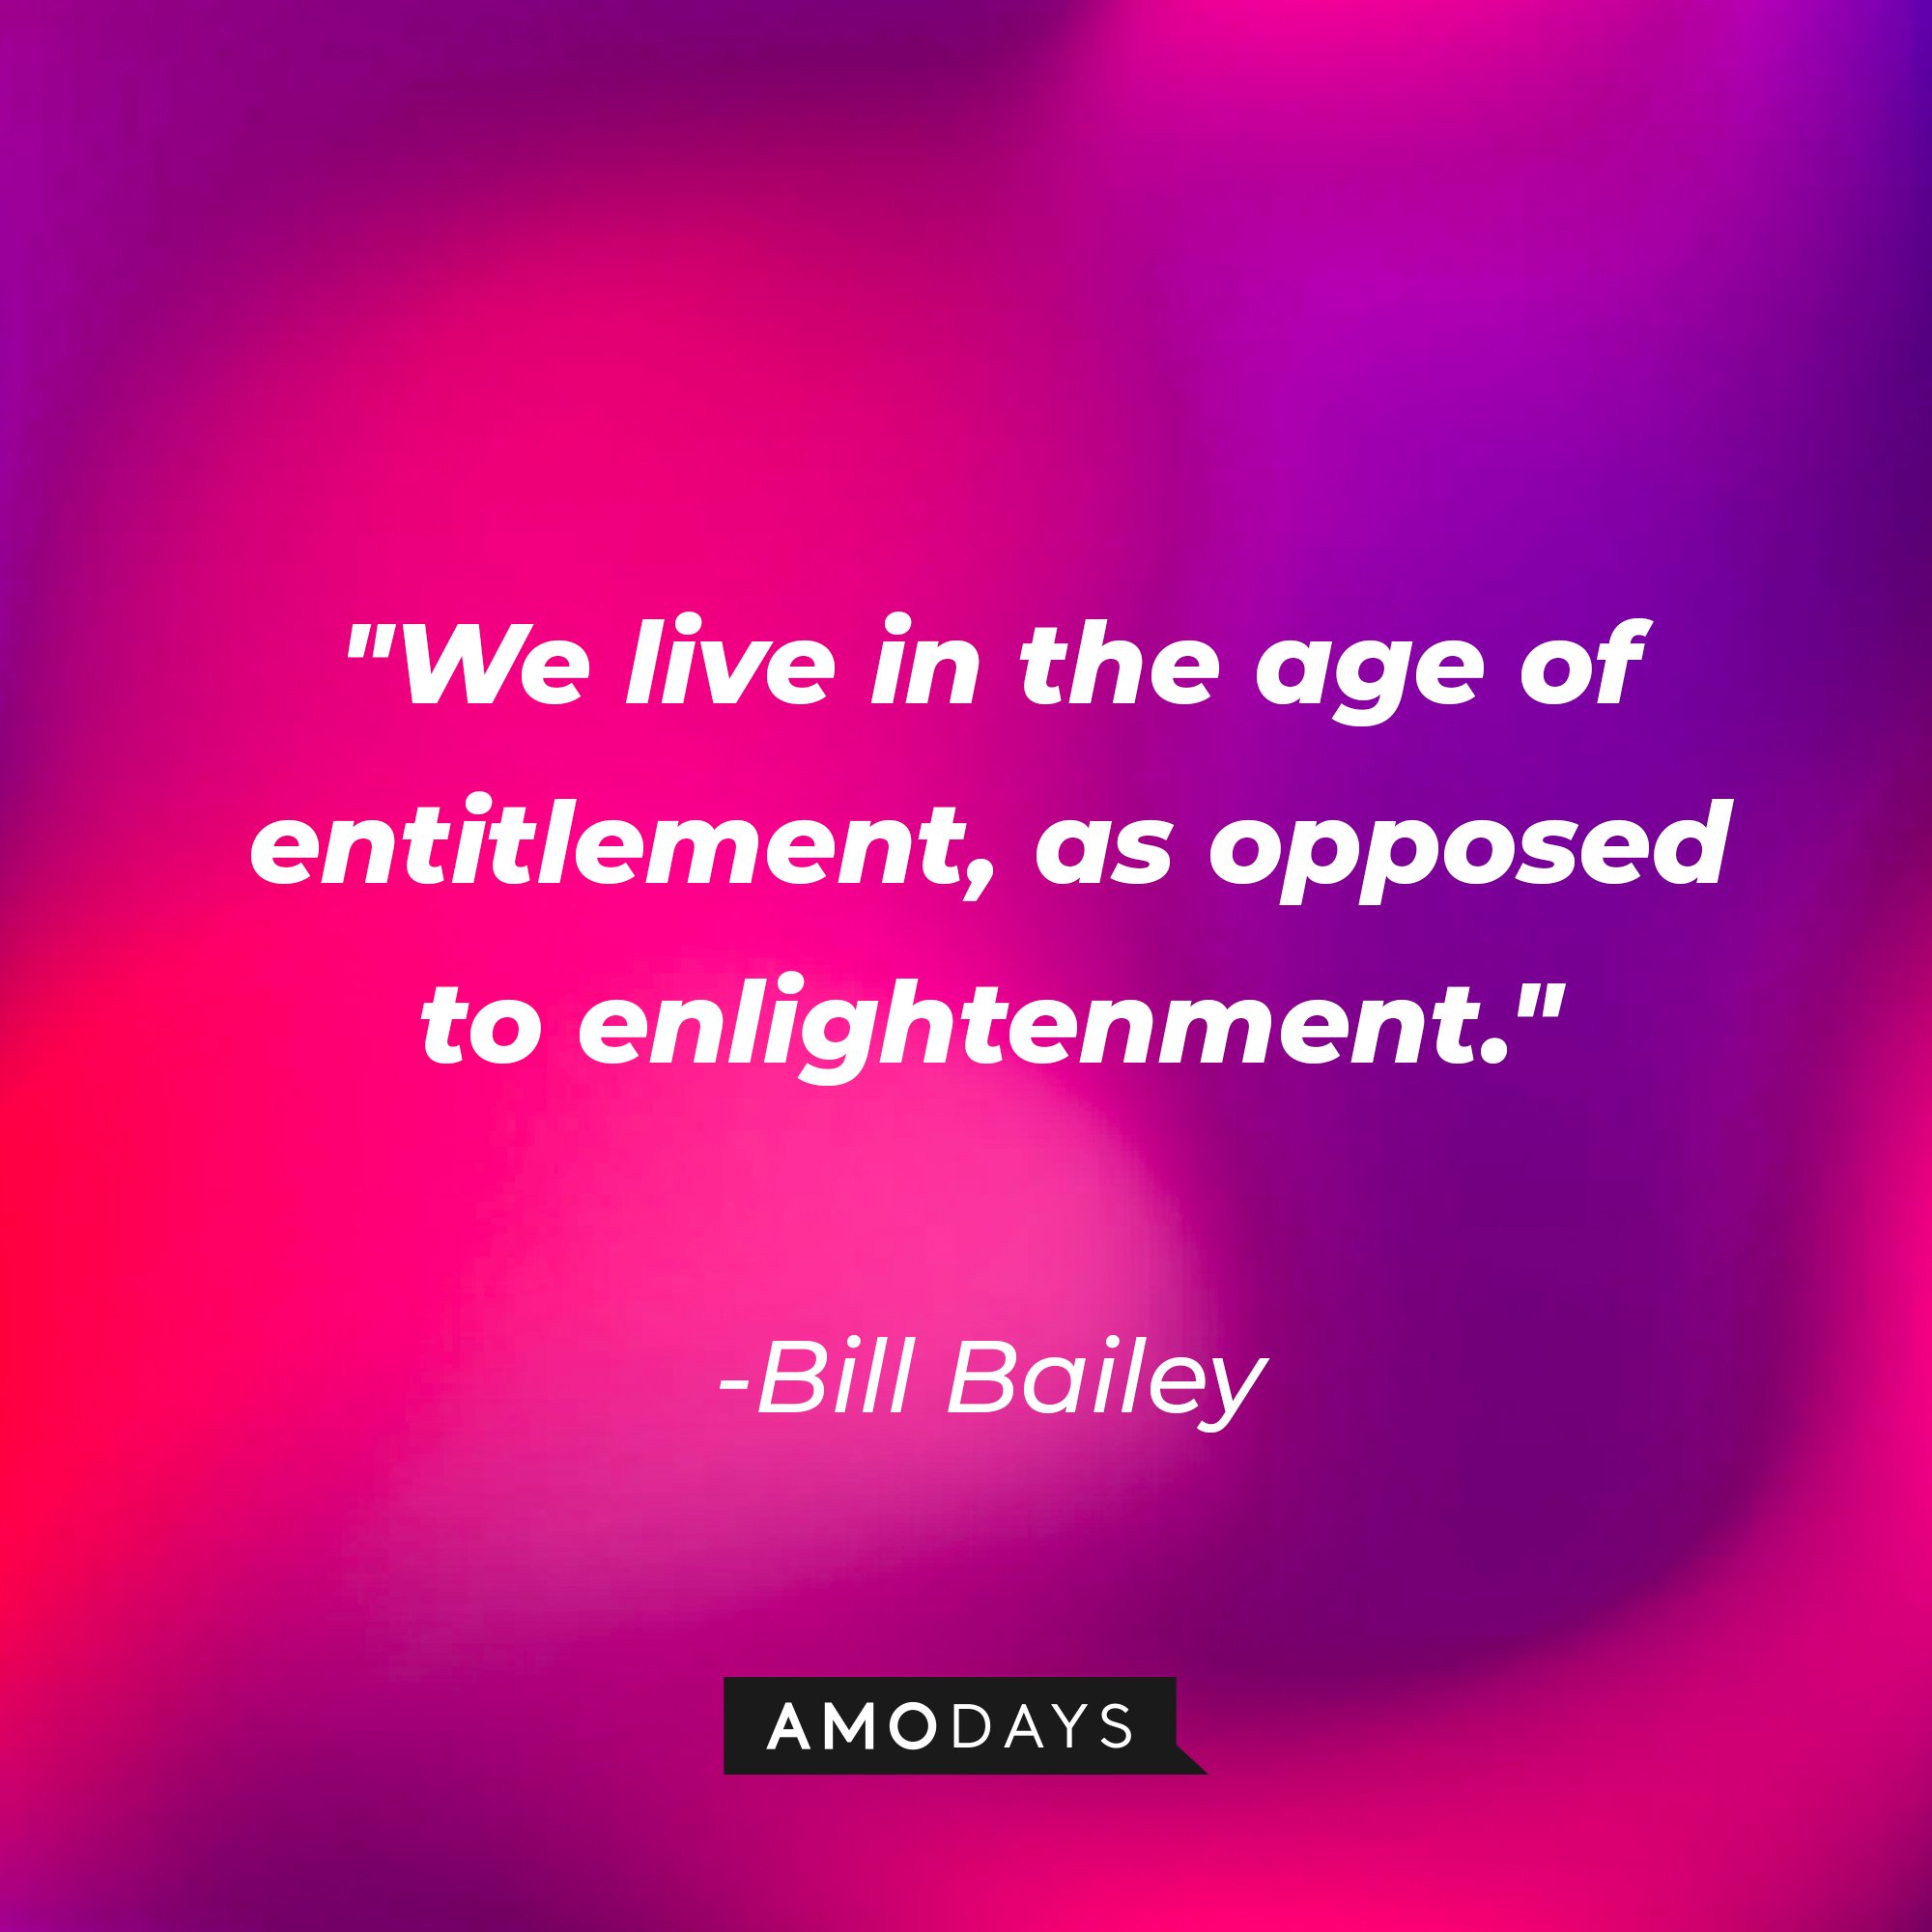 Bill Bailey’s quote: "We live in the age of entitlement, as opposed to enlightenment." | Image: AmoDays